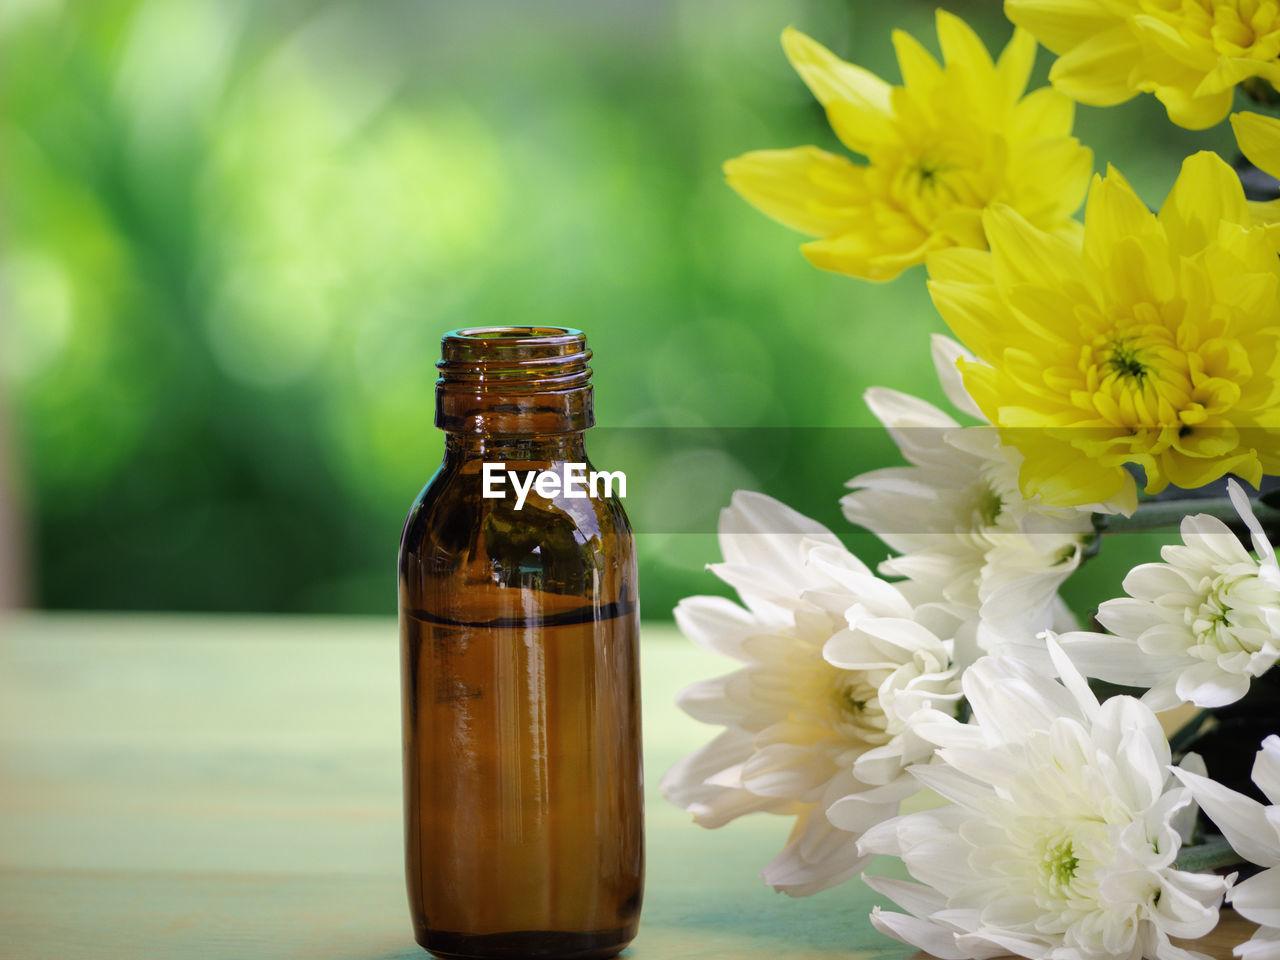 flower, flowering plant, plant, container, yellow, beauty in nature, bottle, freshness, nature, flower head, glass, close-up, no people, fragility, therapy, aromatherapy, jar, indoors, inflorescence, focus on foreground, arrangement, petal, green, glass bottle, macro photography